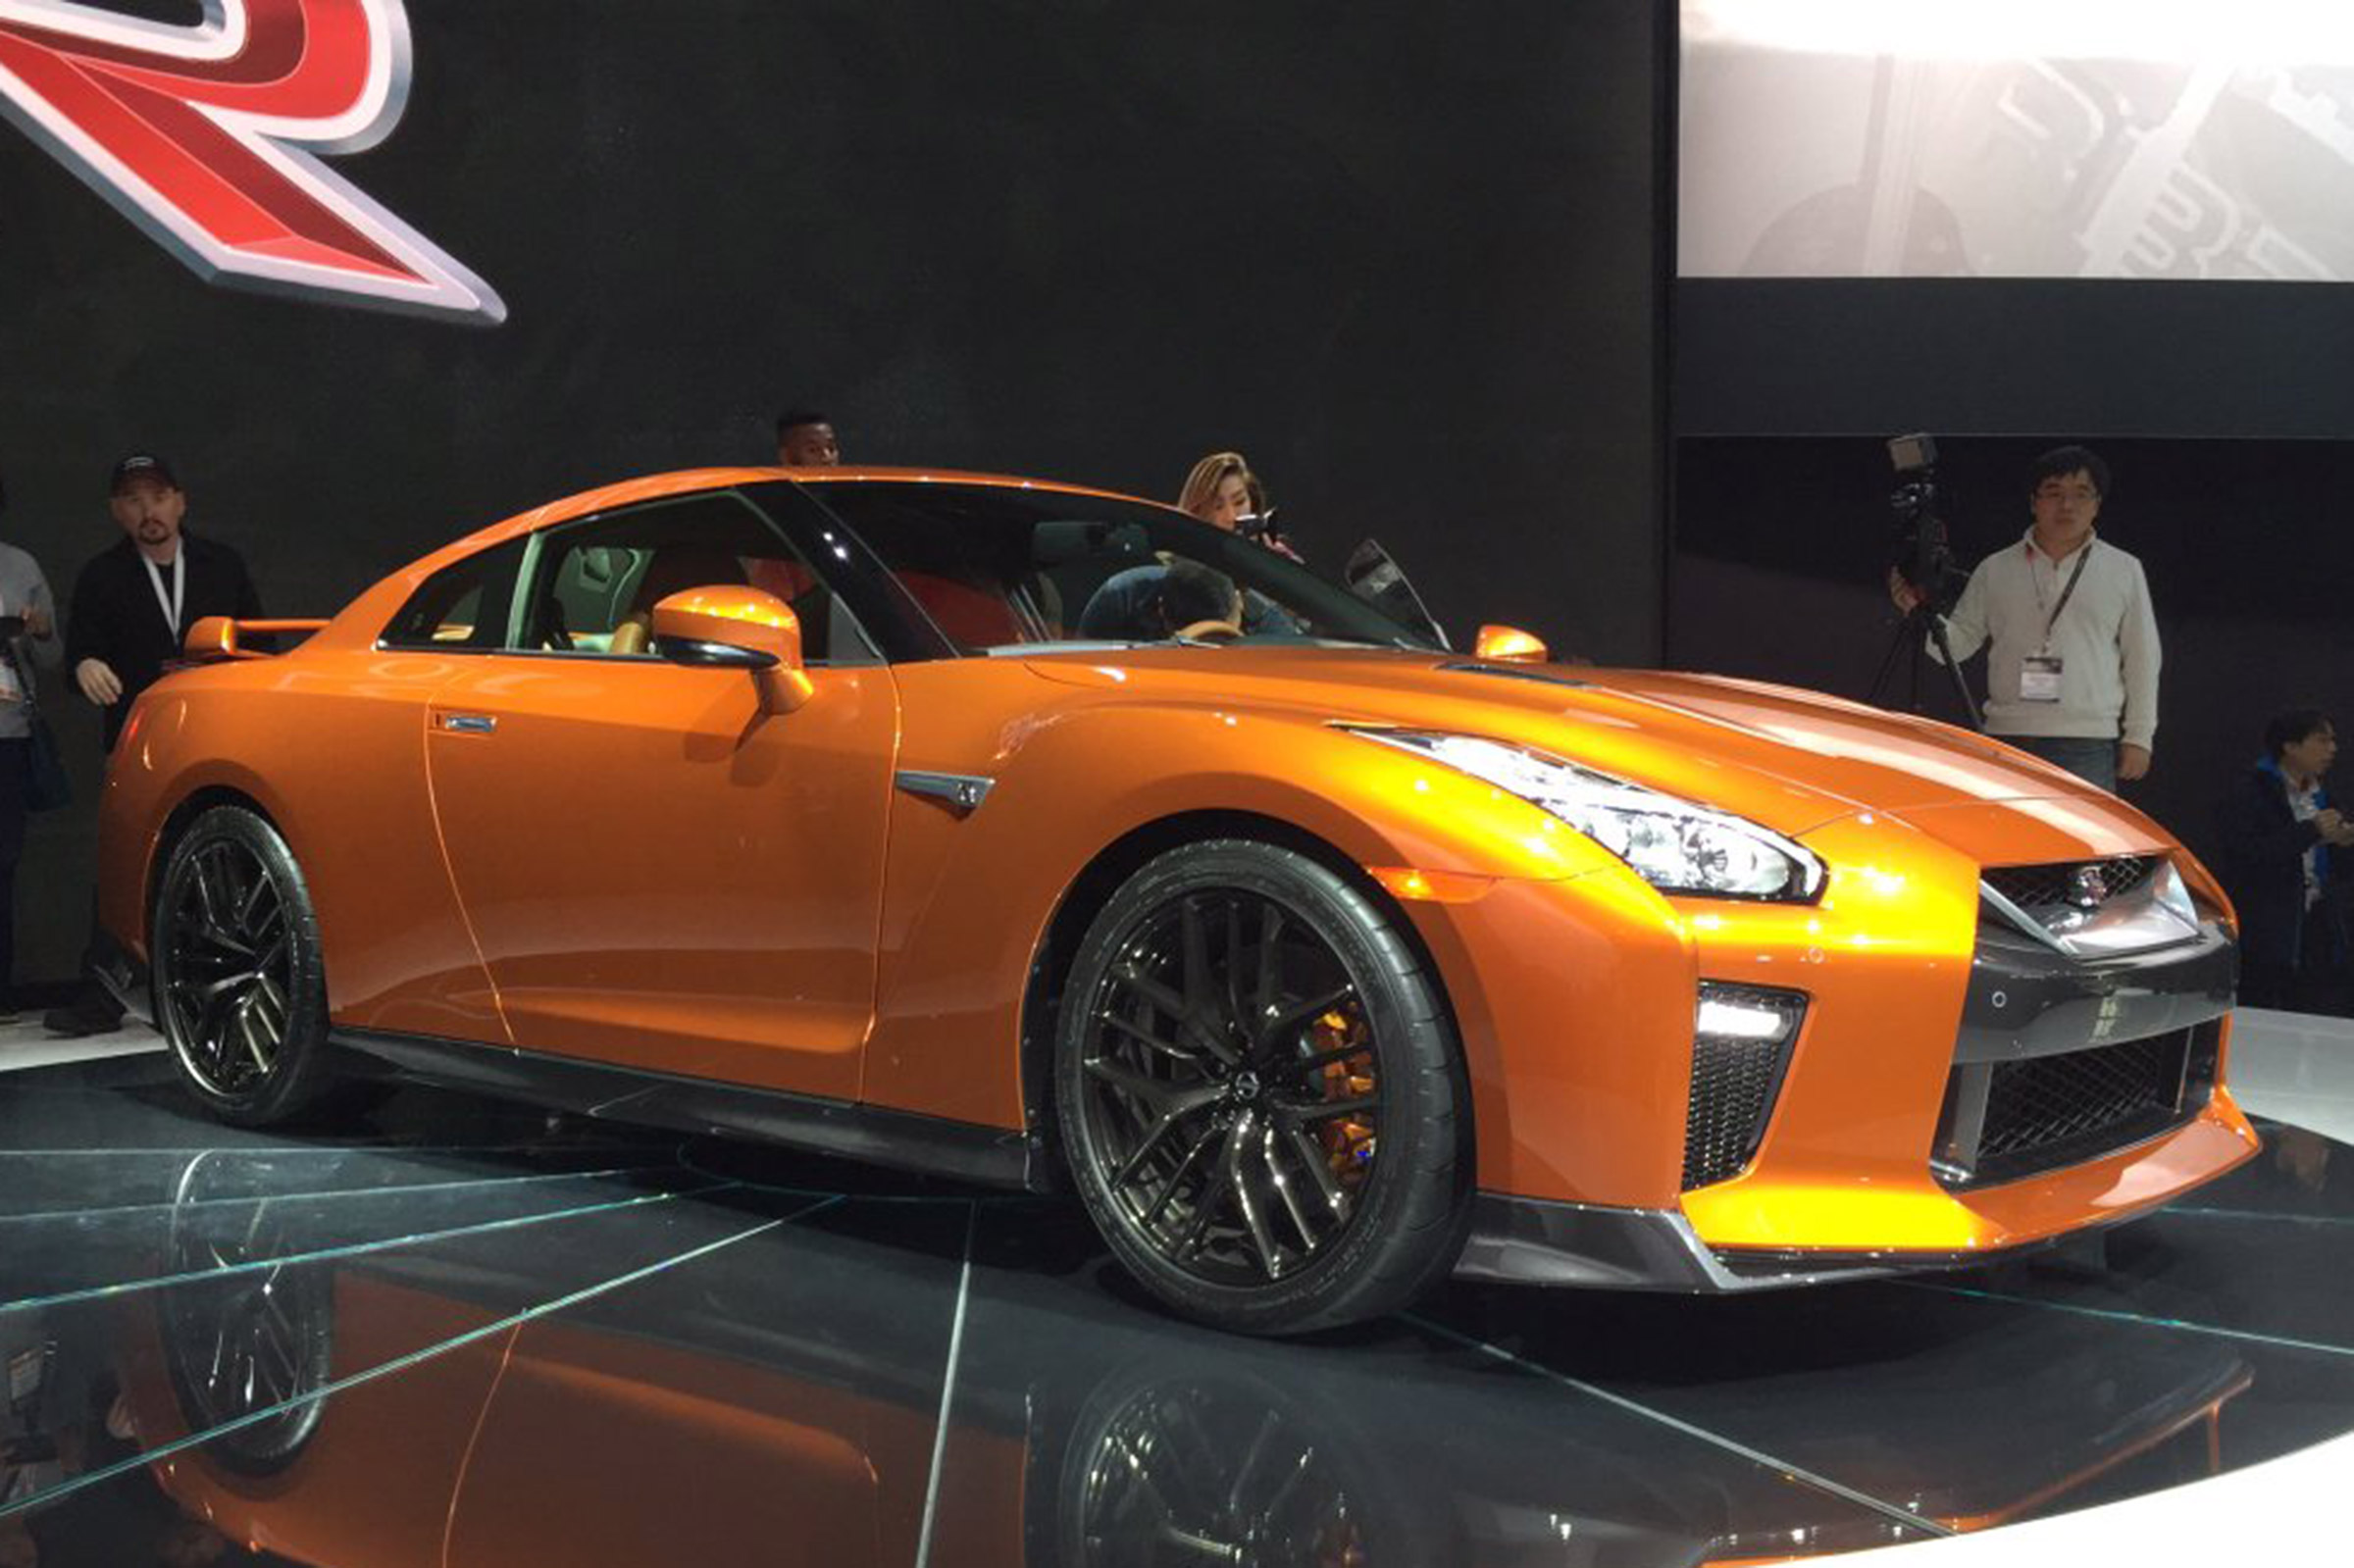 Nissan GT-R 2017: updated supercar unveiled in New York | Auto Express